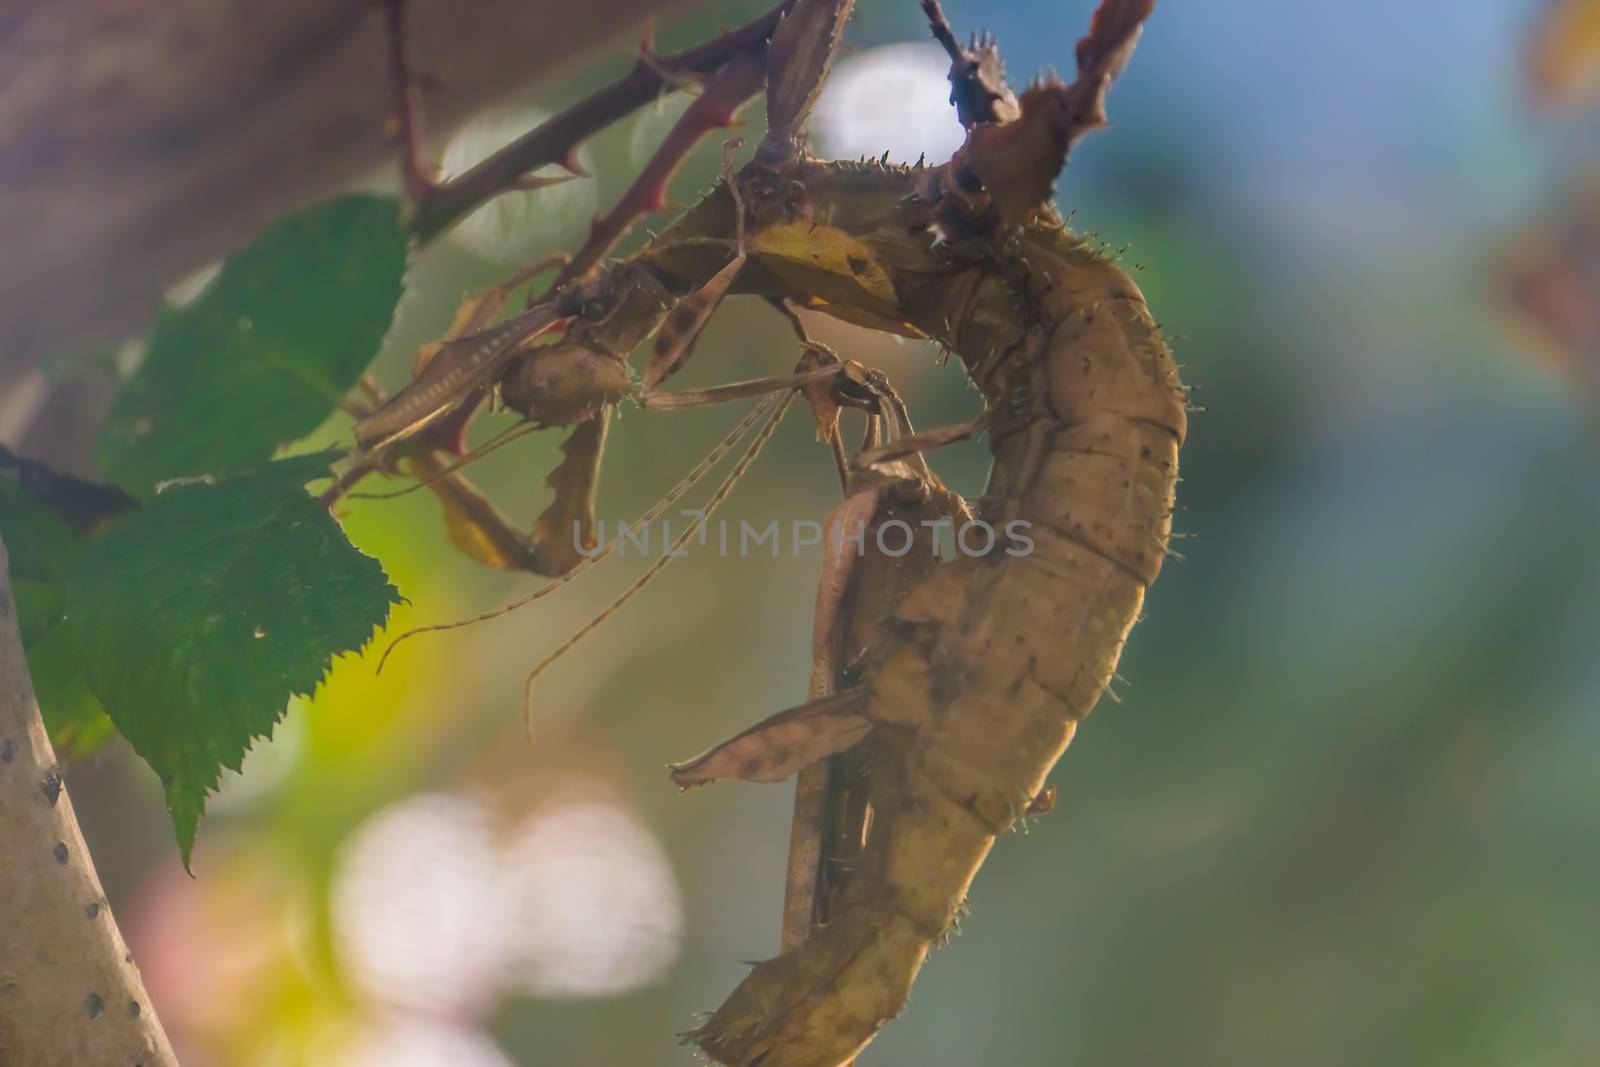 Male and female spiny leaf insect together, tropical walking stick specie from Australia